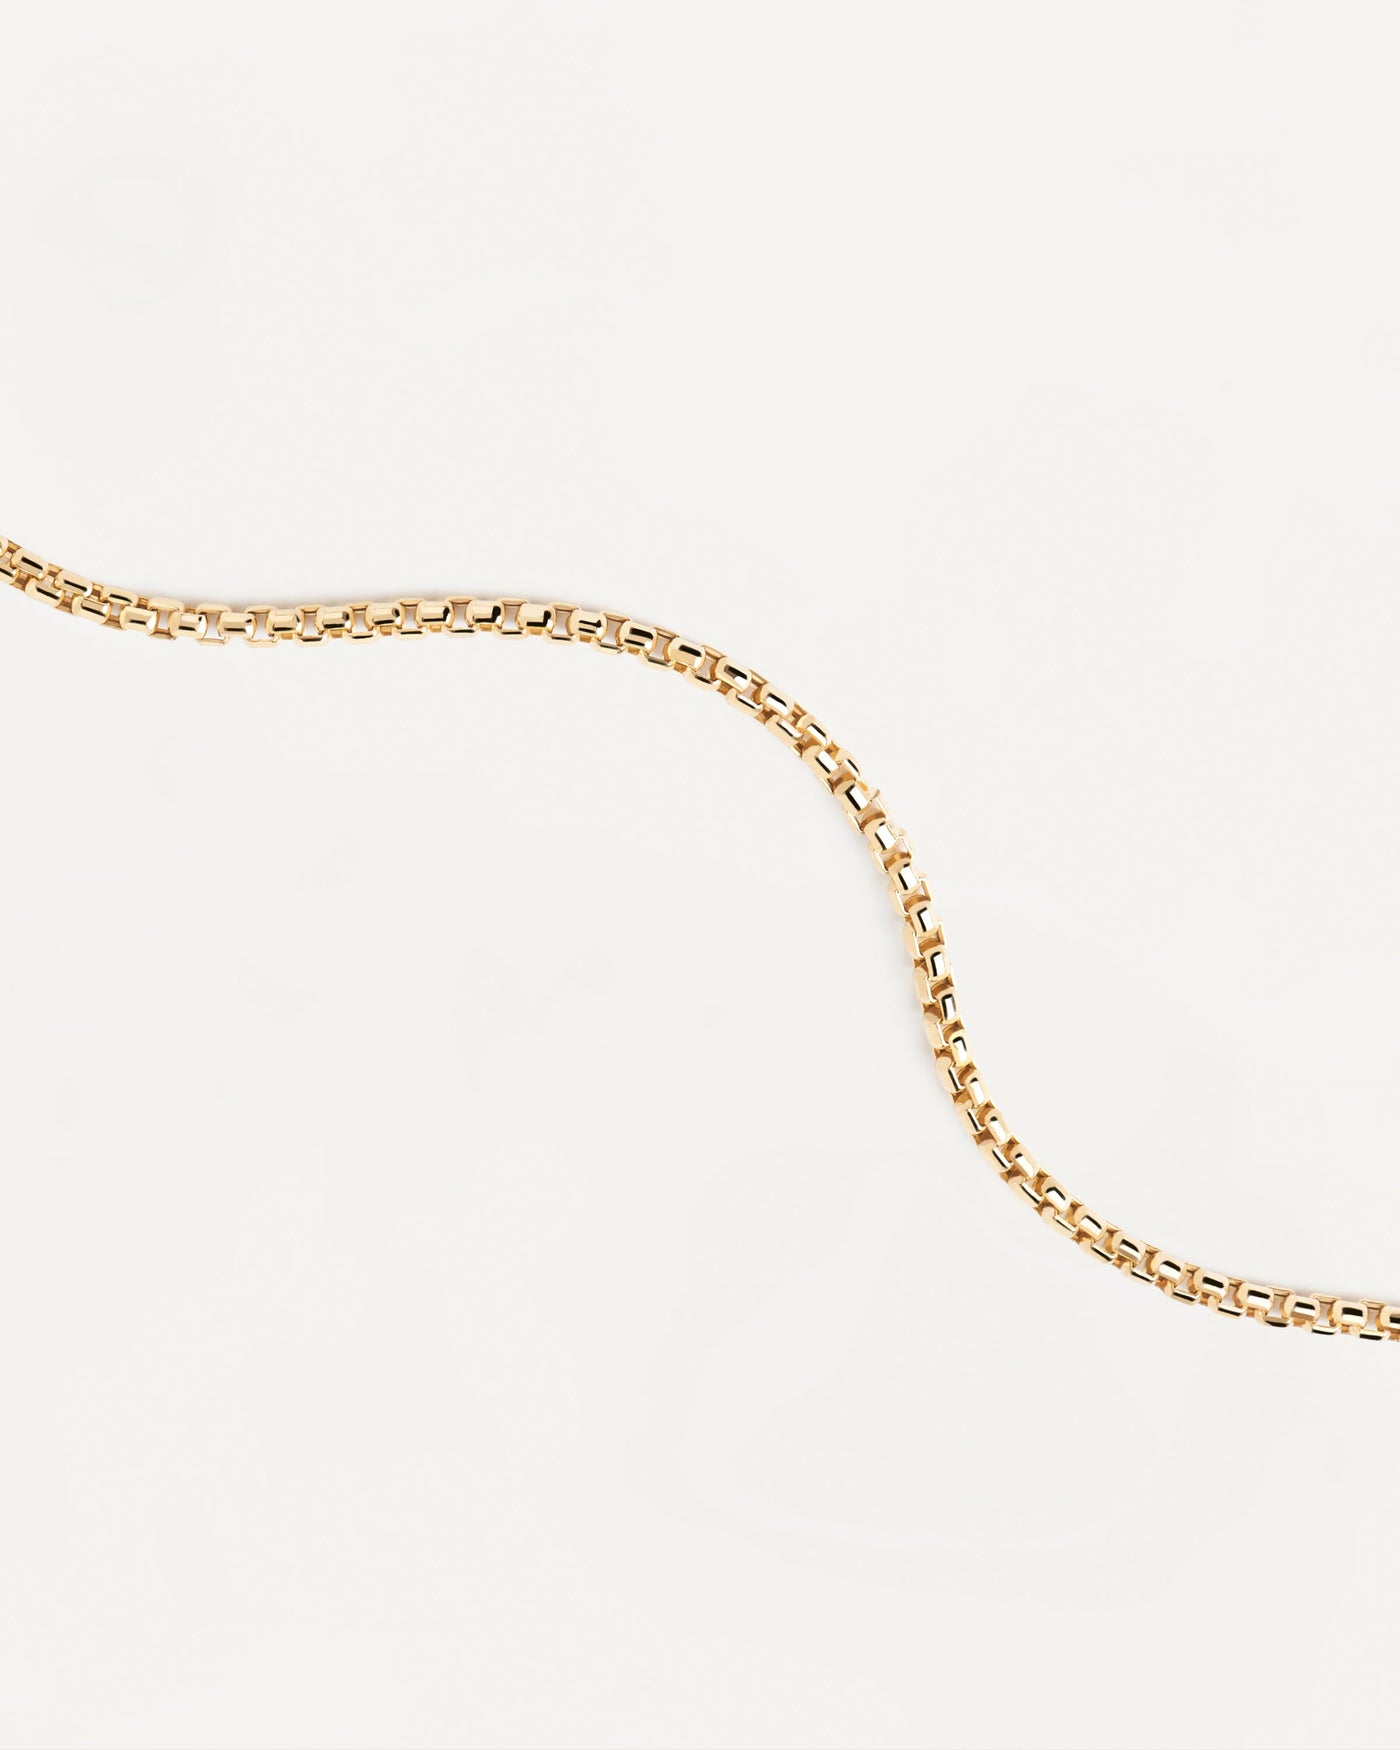 2023 Selection | Gold Box Chain Necklace. 18K solid yellow gold chain necklace with box links. Get the latest arrival from PDPAOLA. Place your order safely and get this Best Seller. Free Shipping.